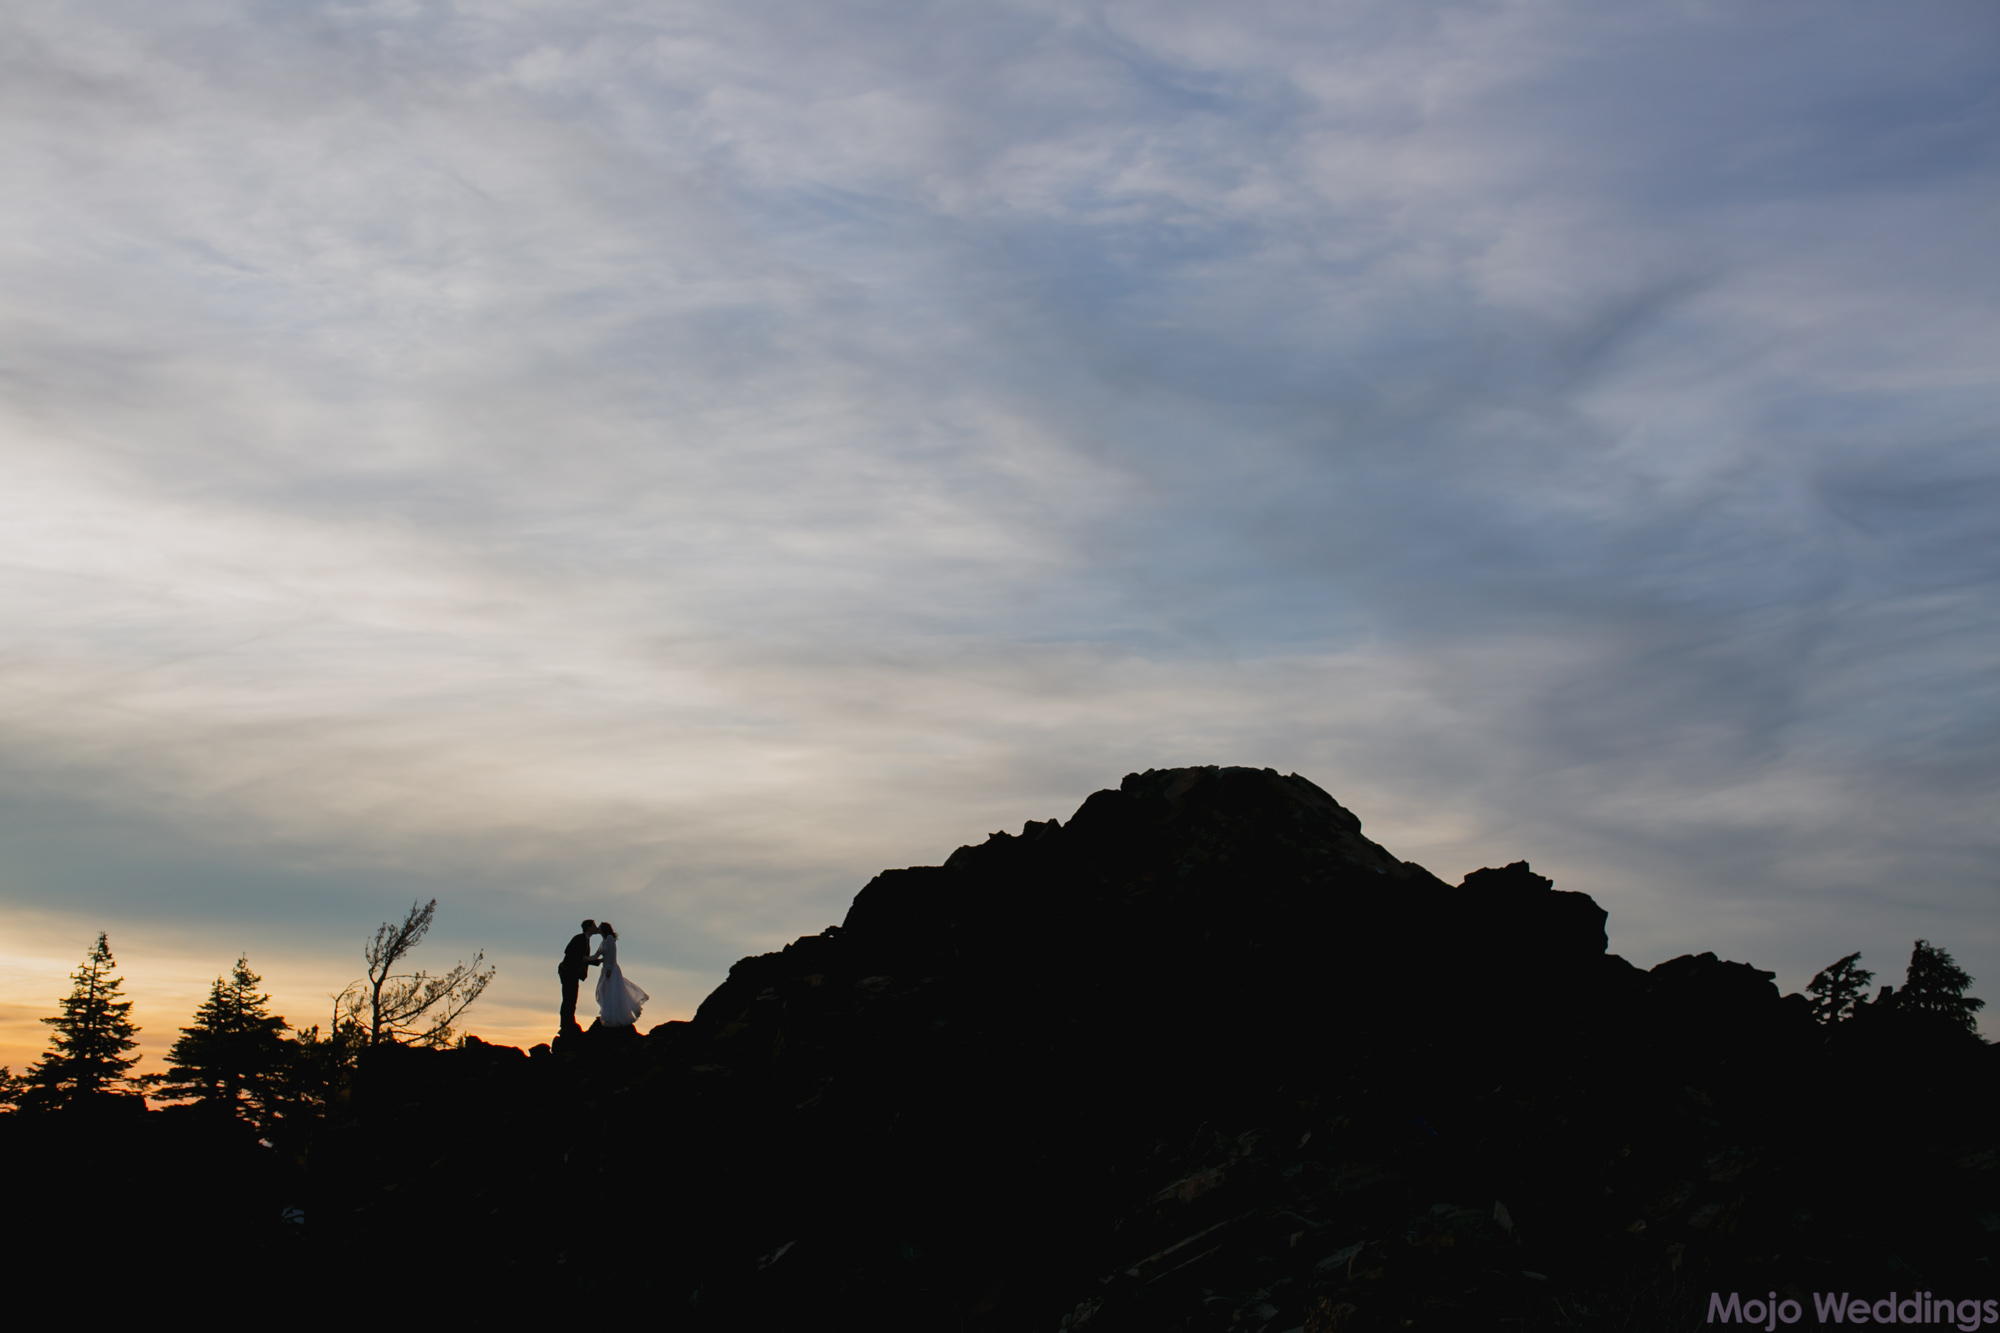 A silhouette of the bride and groom along the peak of the mountain.